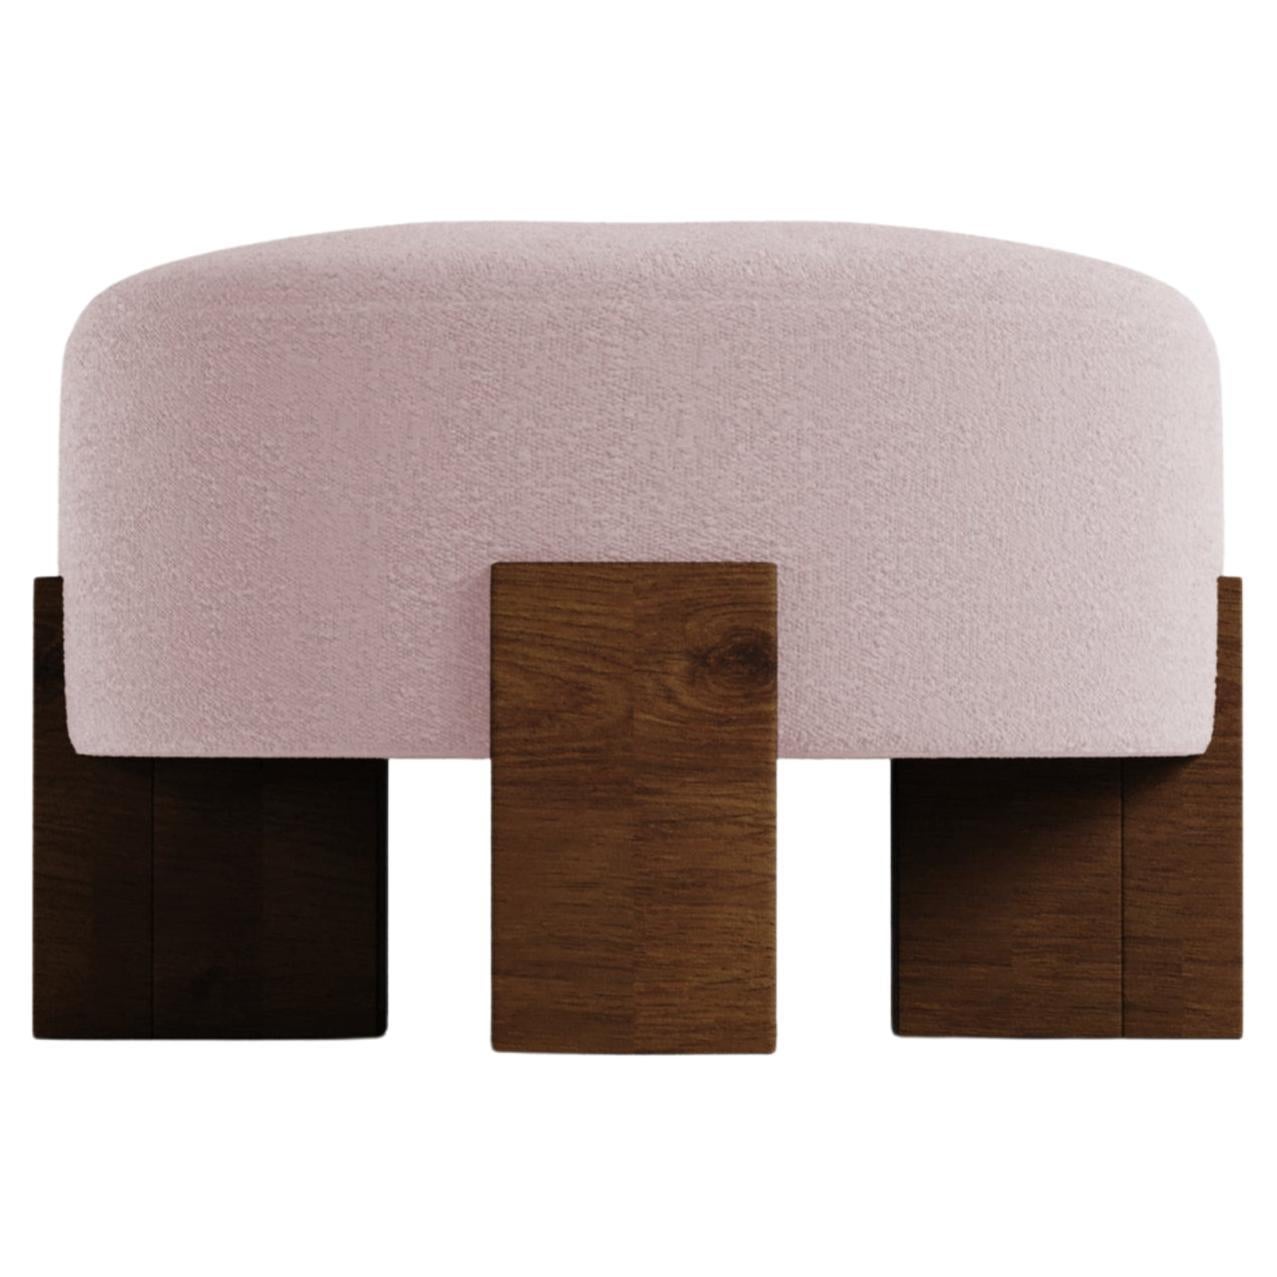 Collector Contemporary Cassete Puff in Boucle Rose by Alter Ego Studio